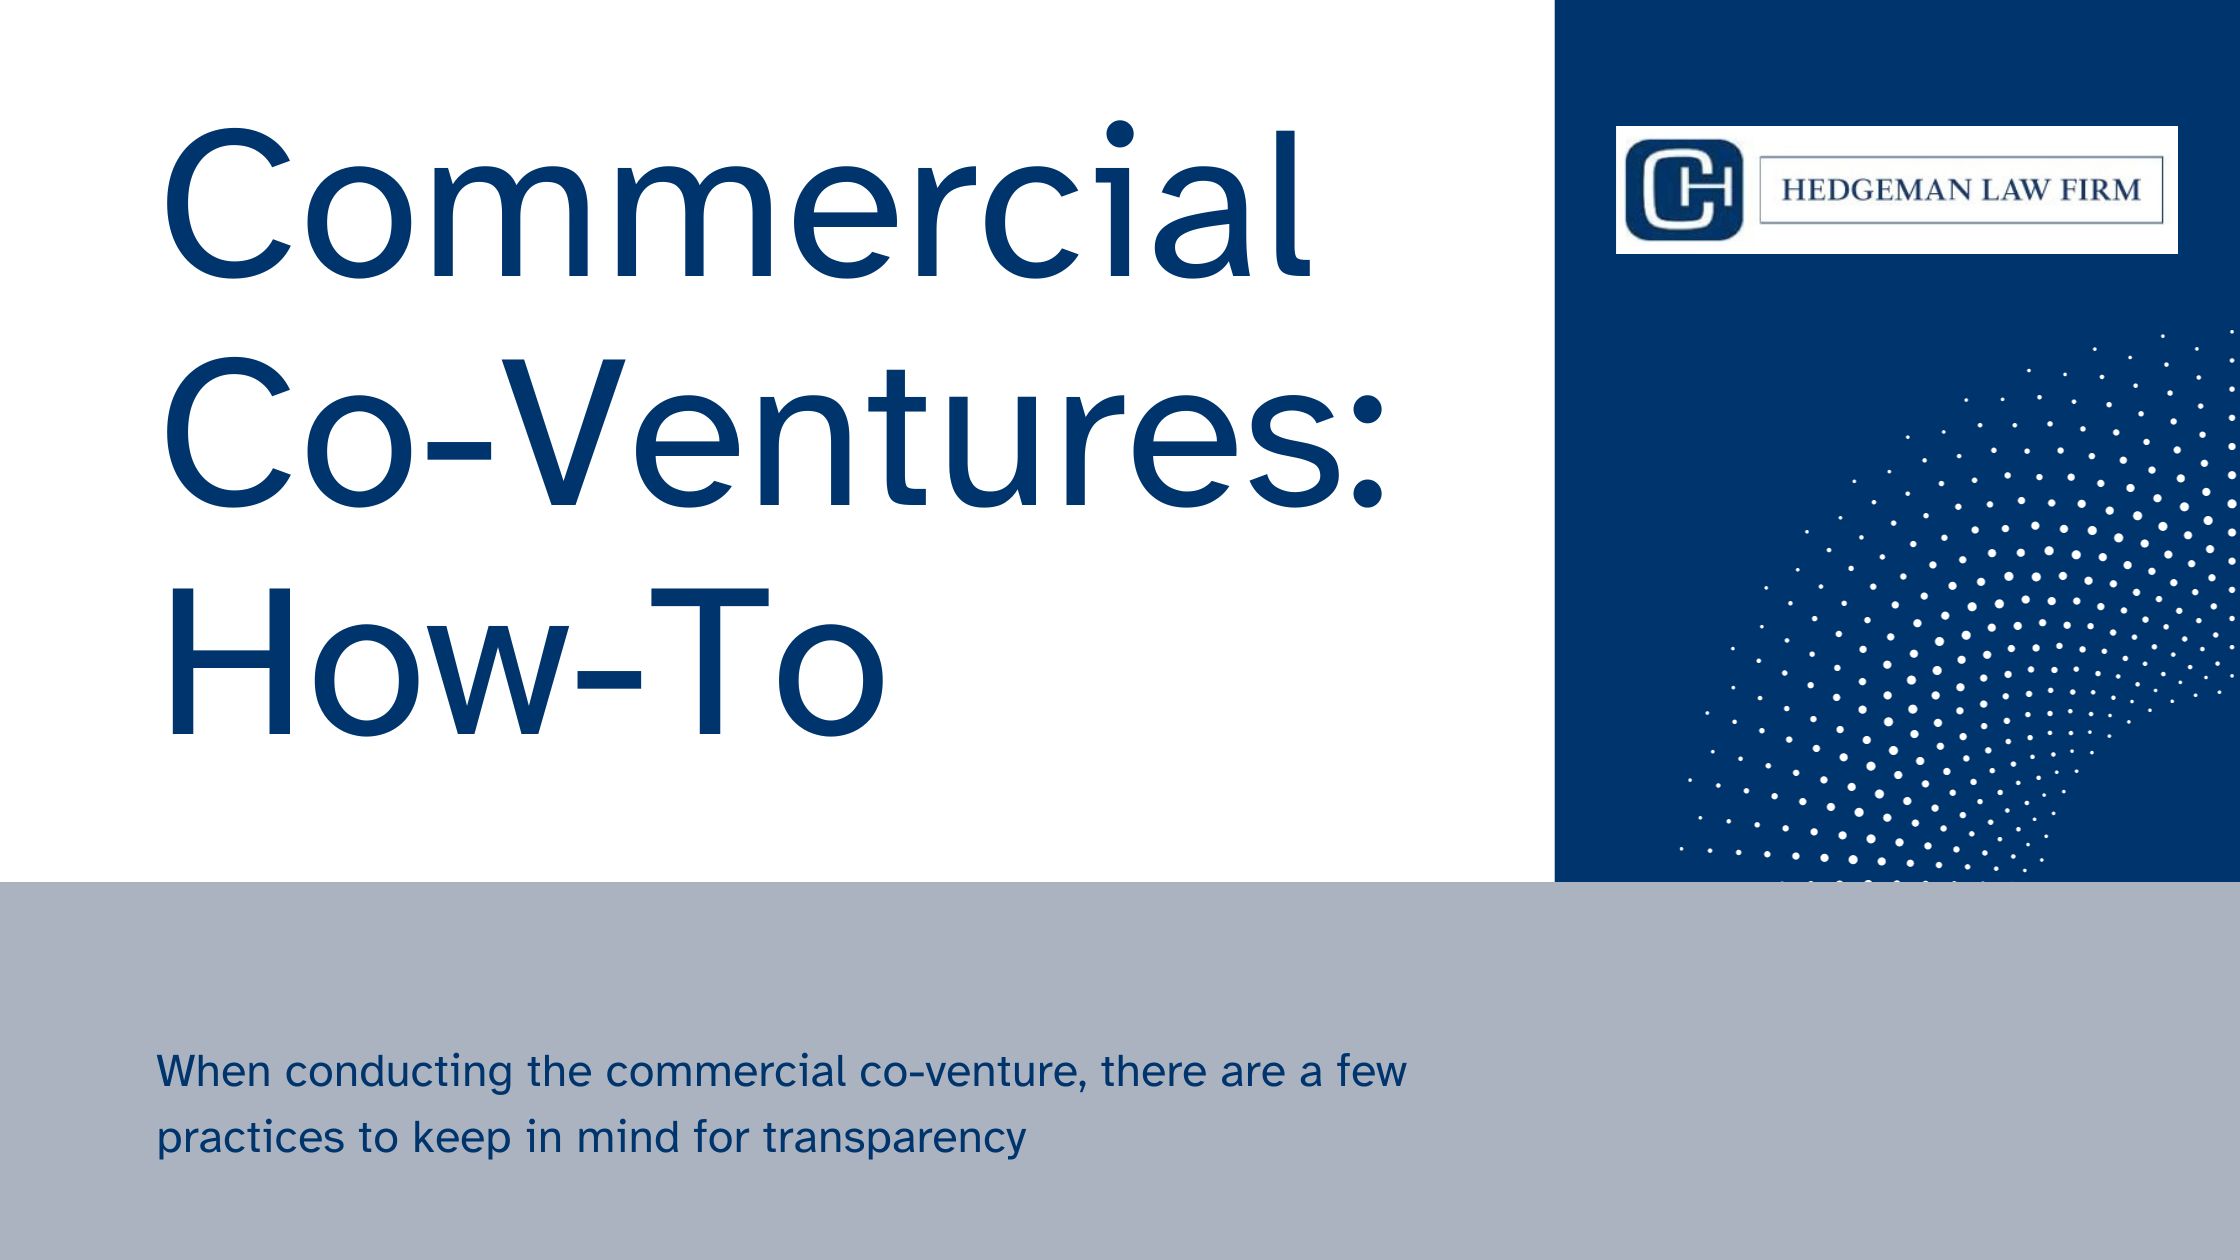 Commercial Co-Ventures How-To